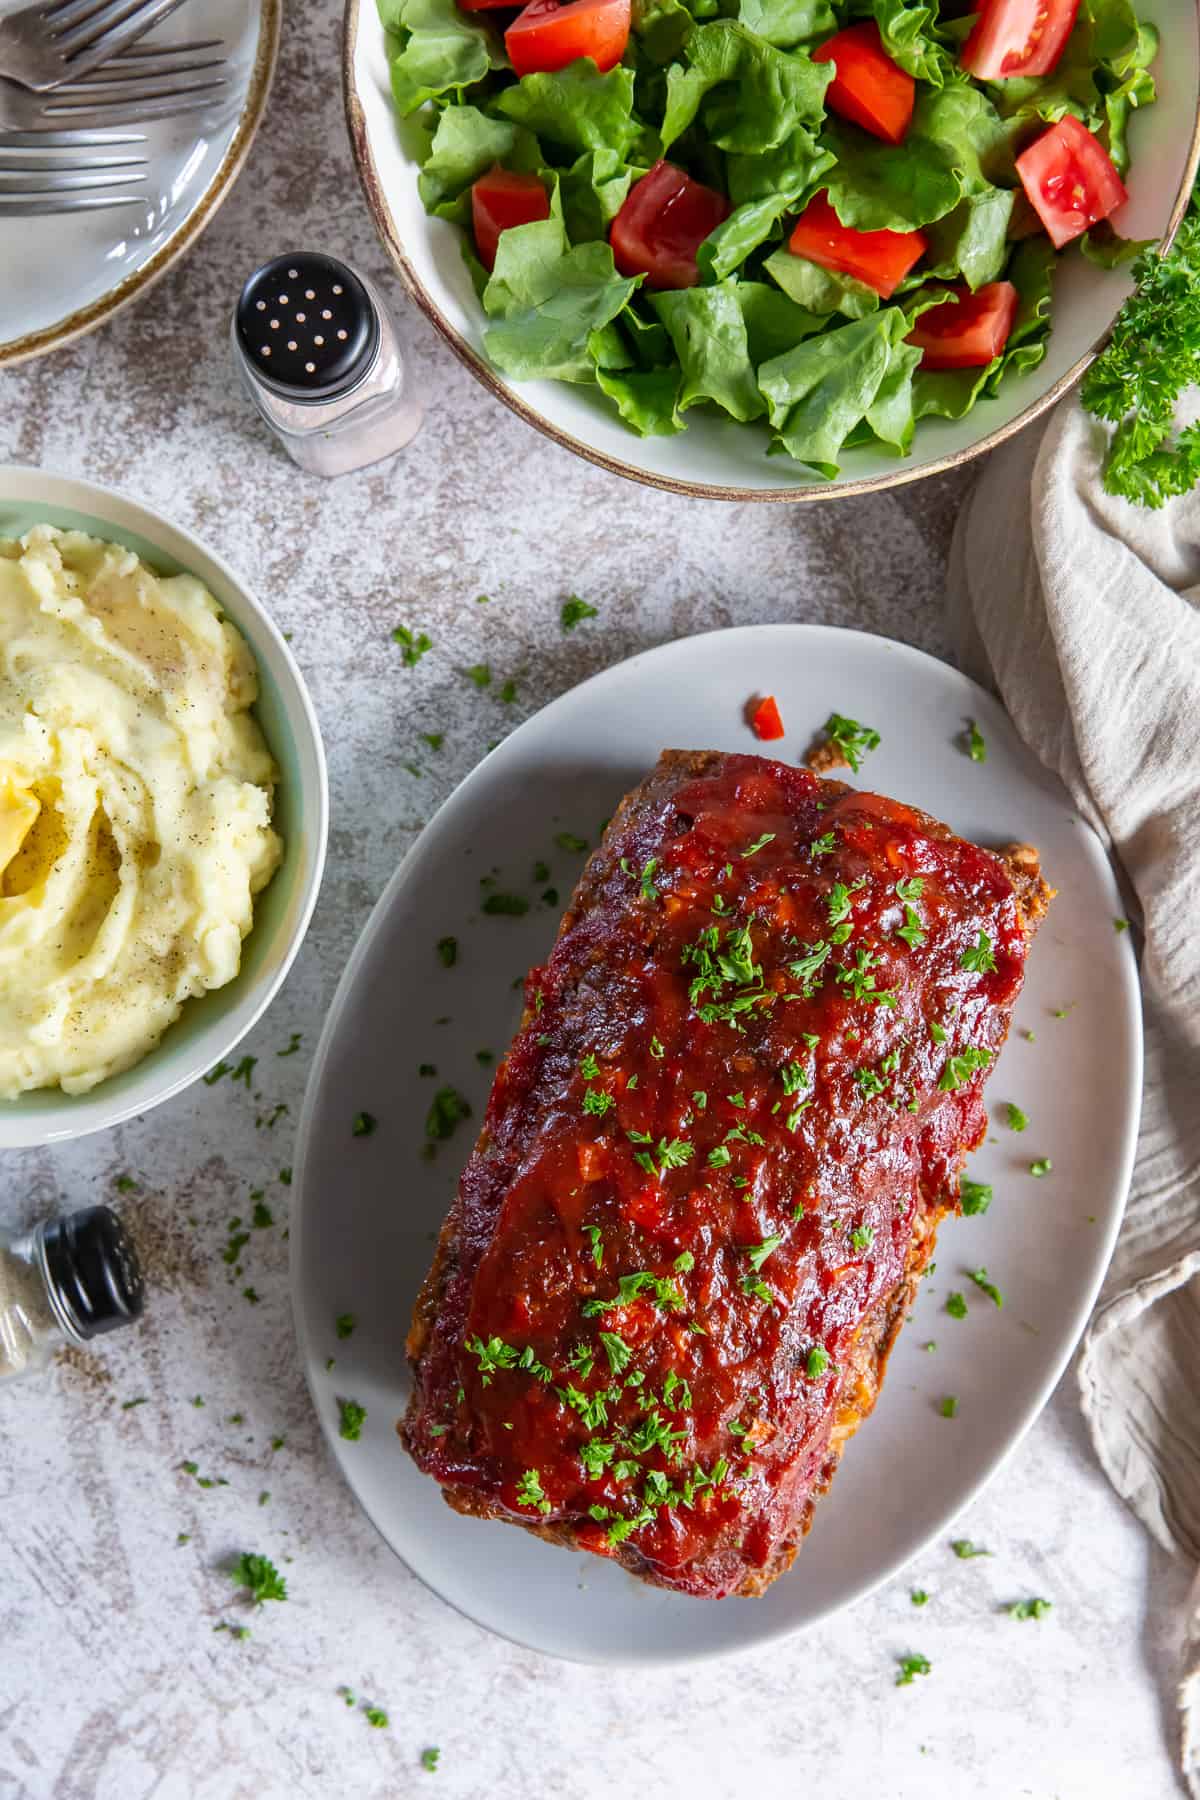 A glazed meatloaf on a platter next to a salad and mashed potatoes.